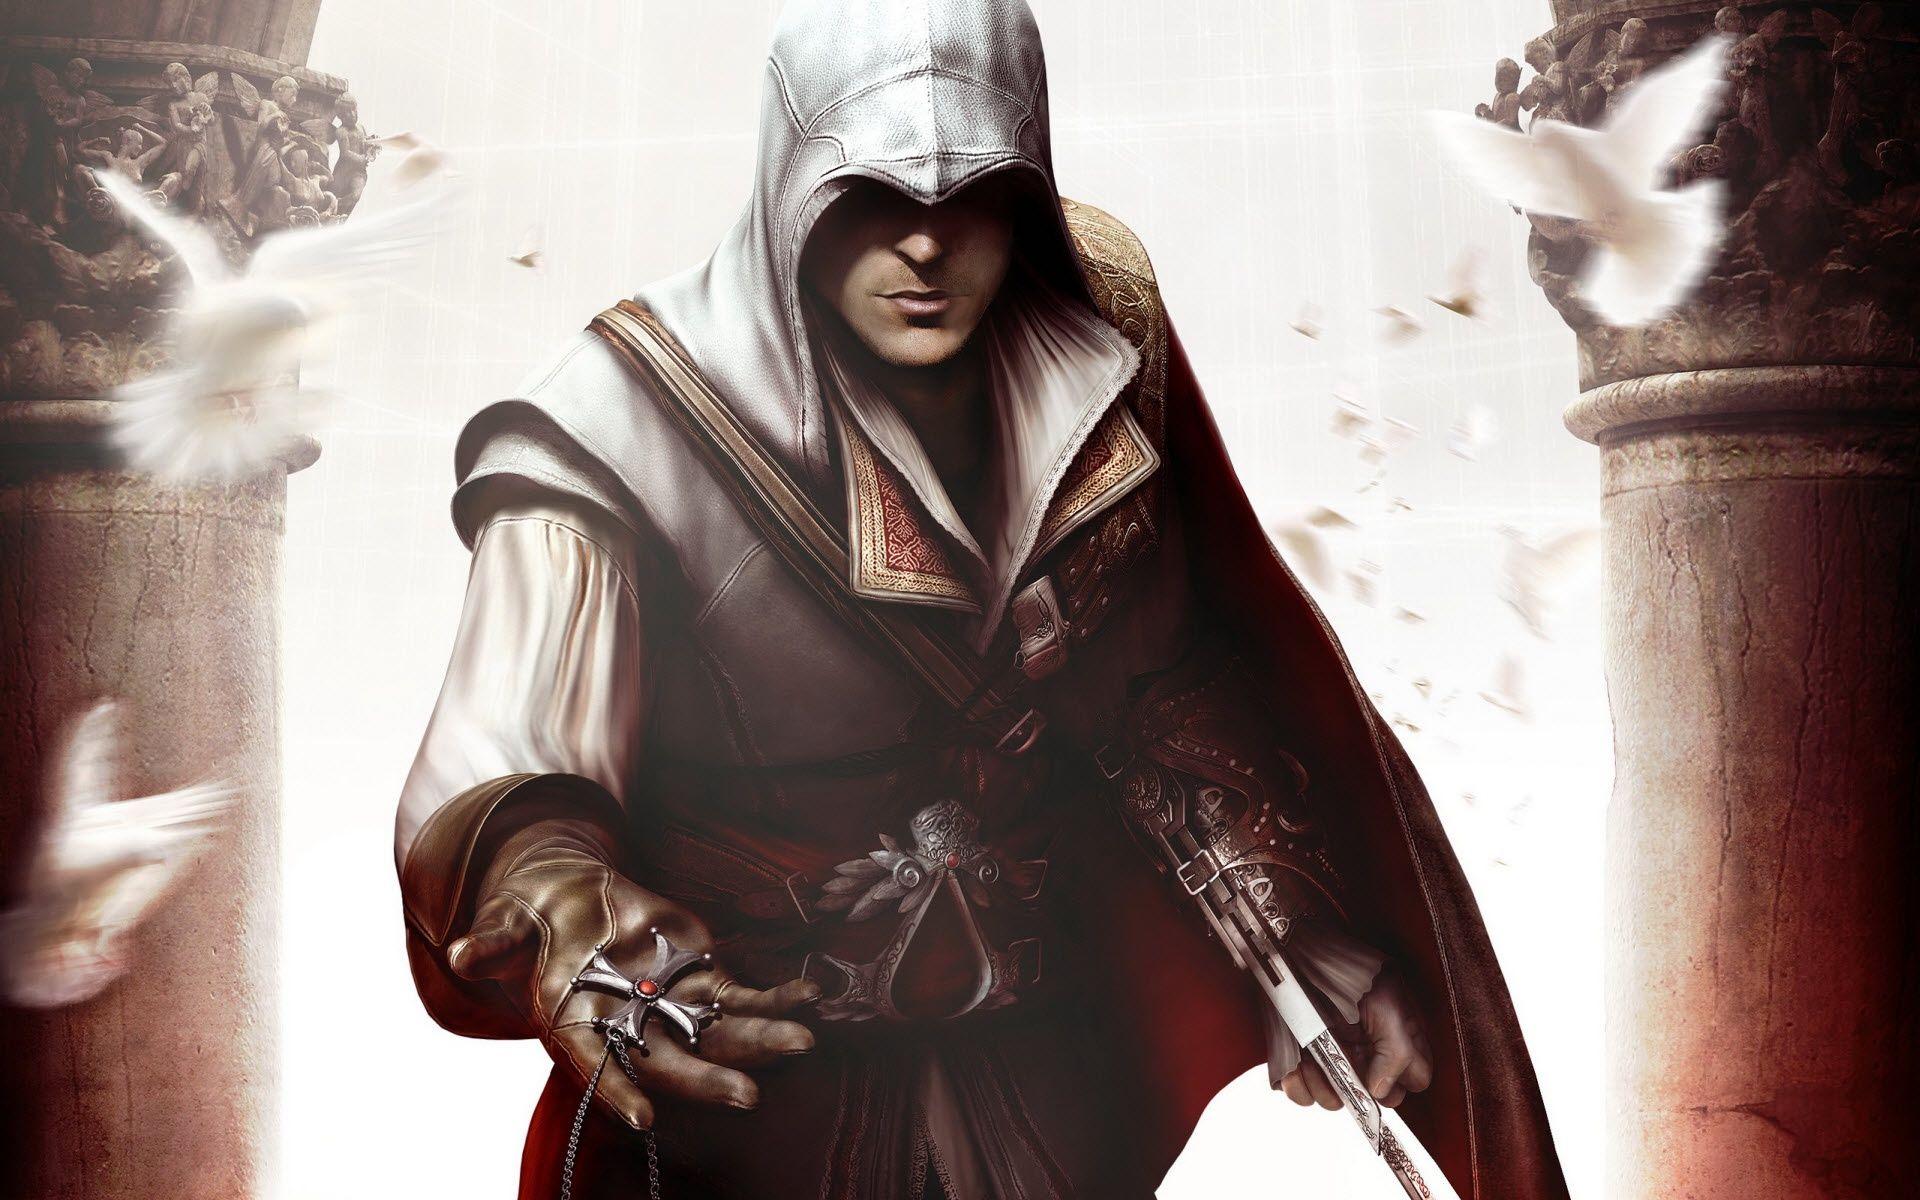 Assassin's Creed II HQ Wallpaper in jpg format for free download